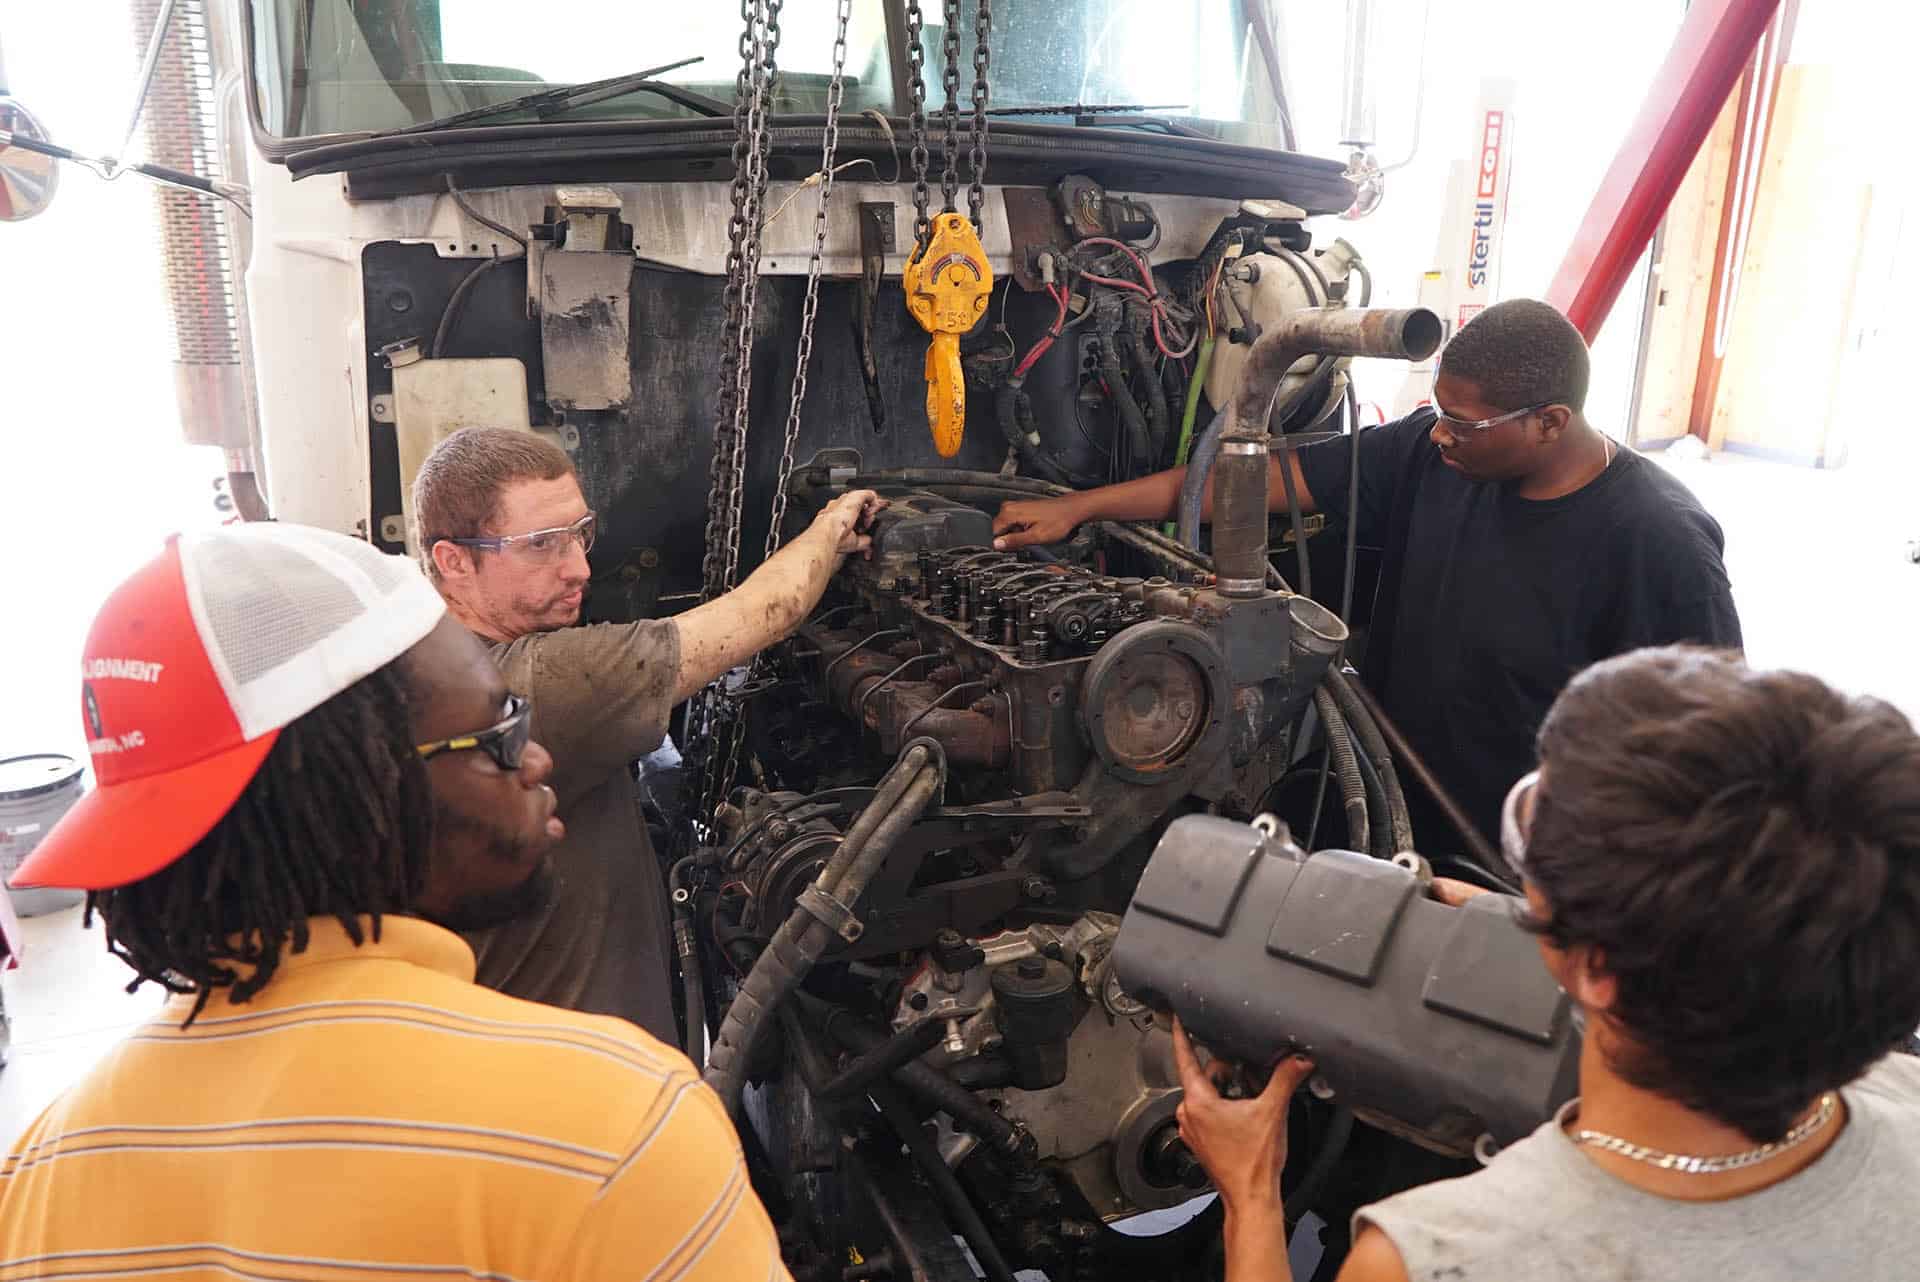 students work on a large Diesel engine